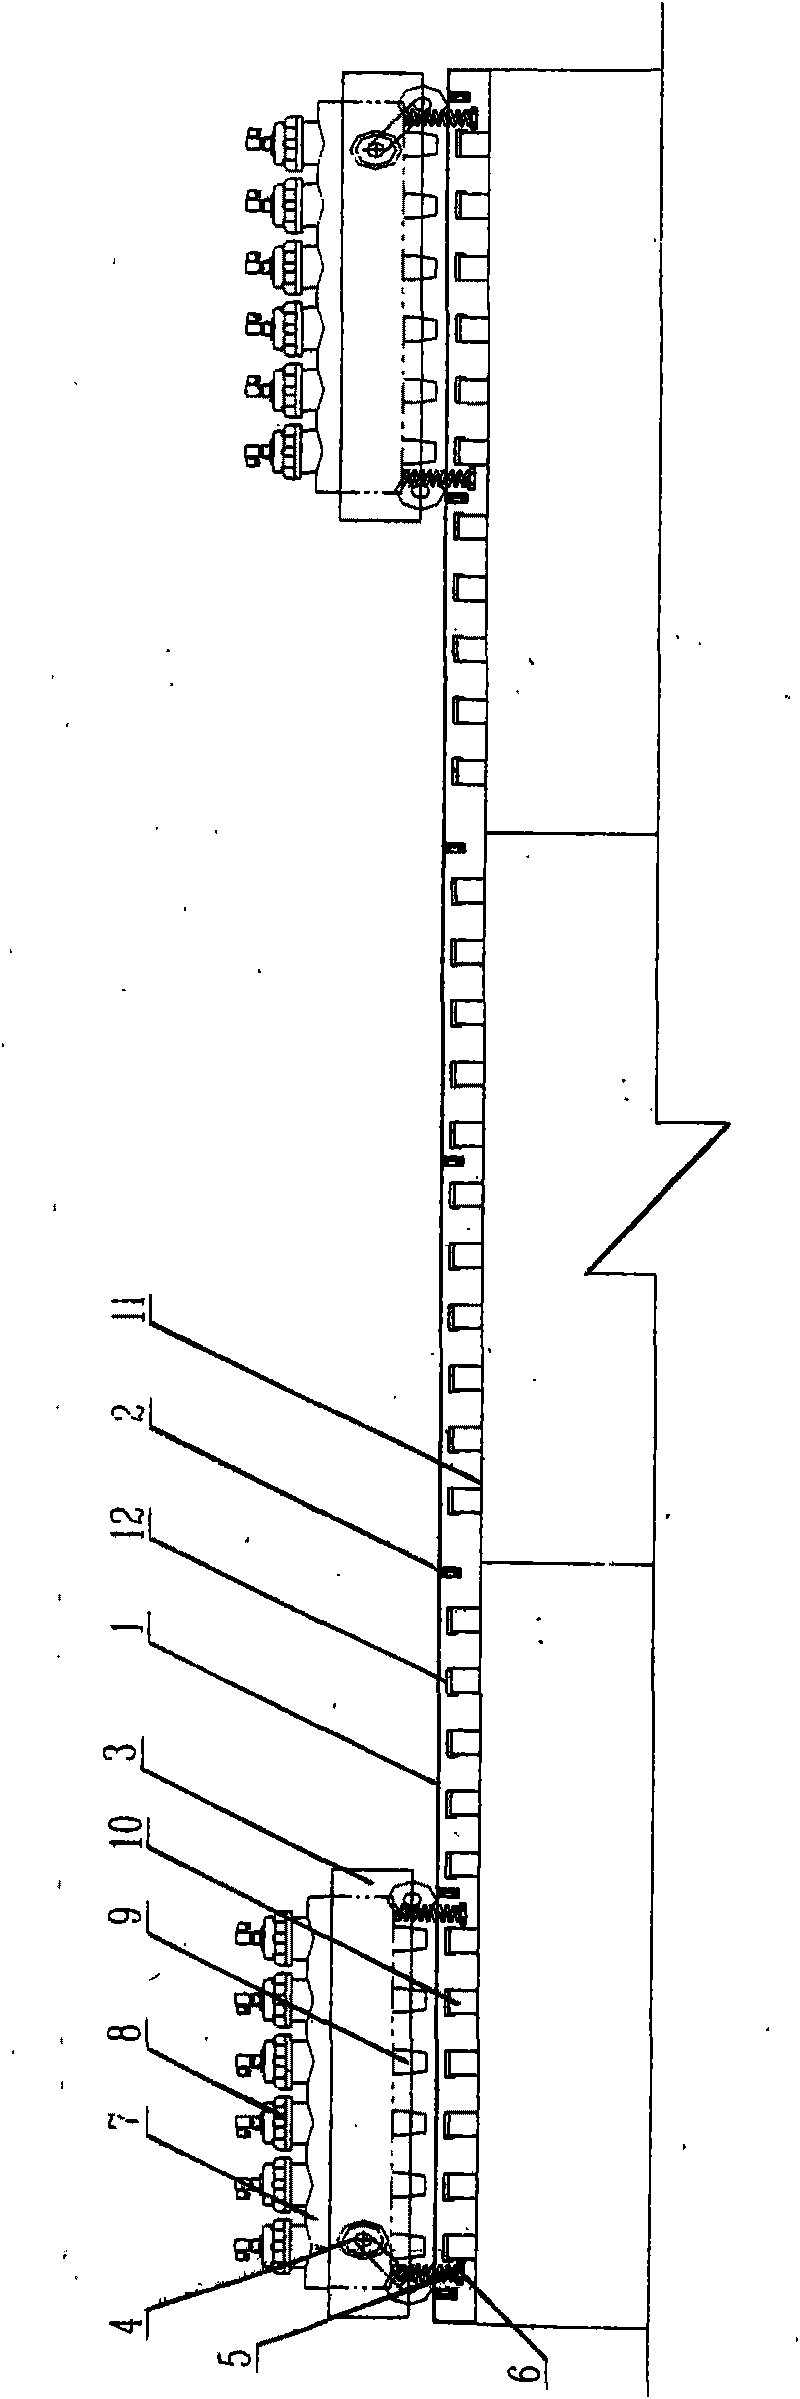 Mobile pulse jetting deashing device